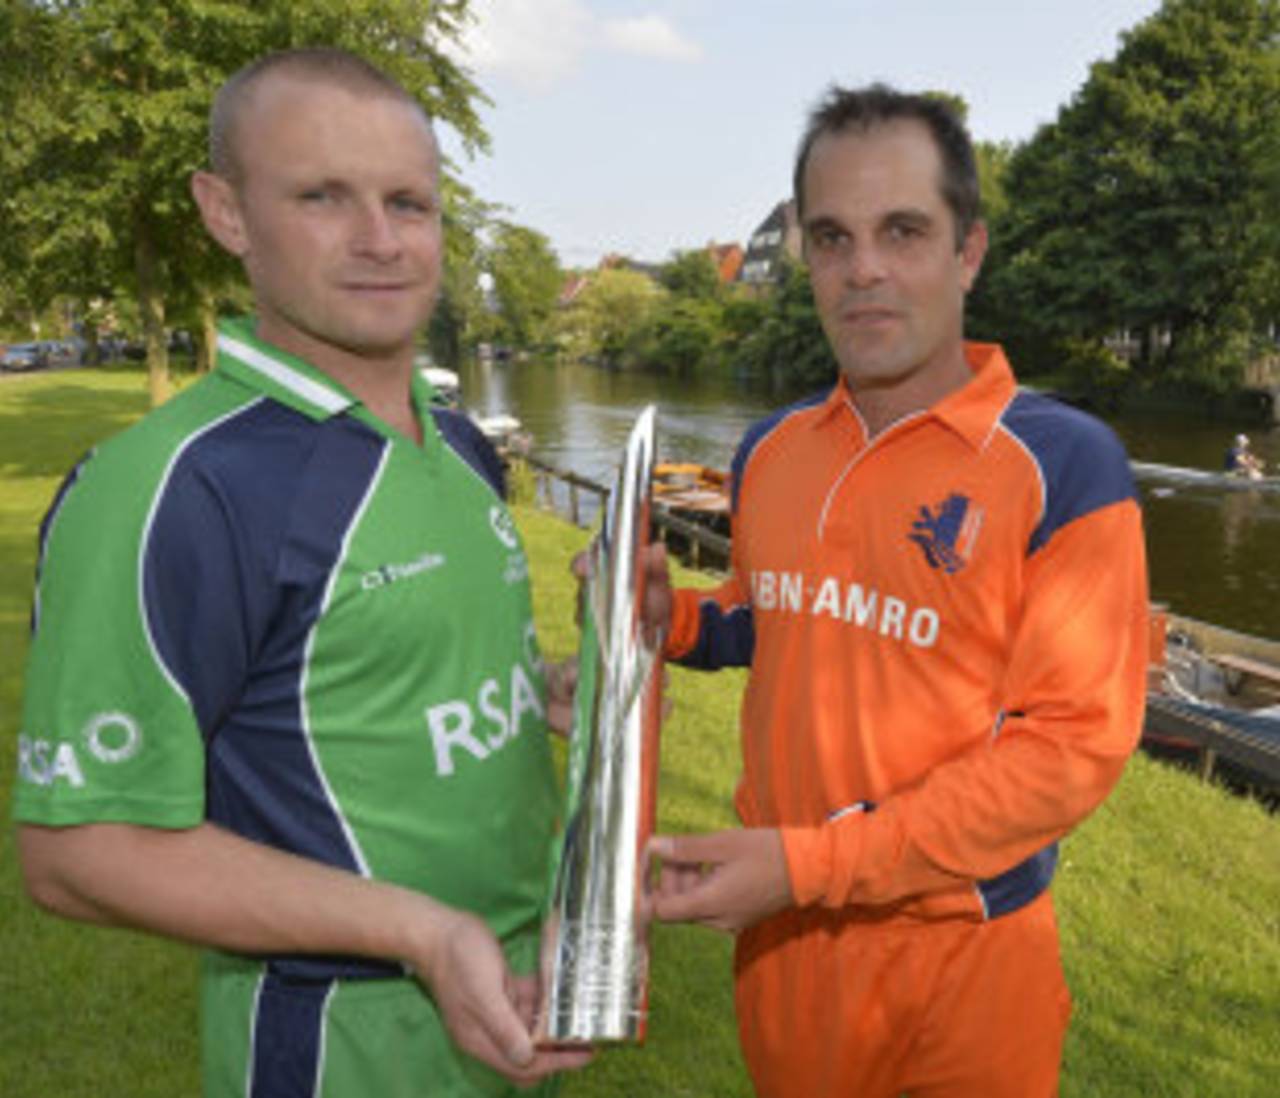 William Porterfield and Peter Borren pose with the WCL Championship trophy&nbsp;&nbsp;&bull;&nbsp;&nbsp;ICC